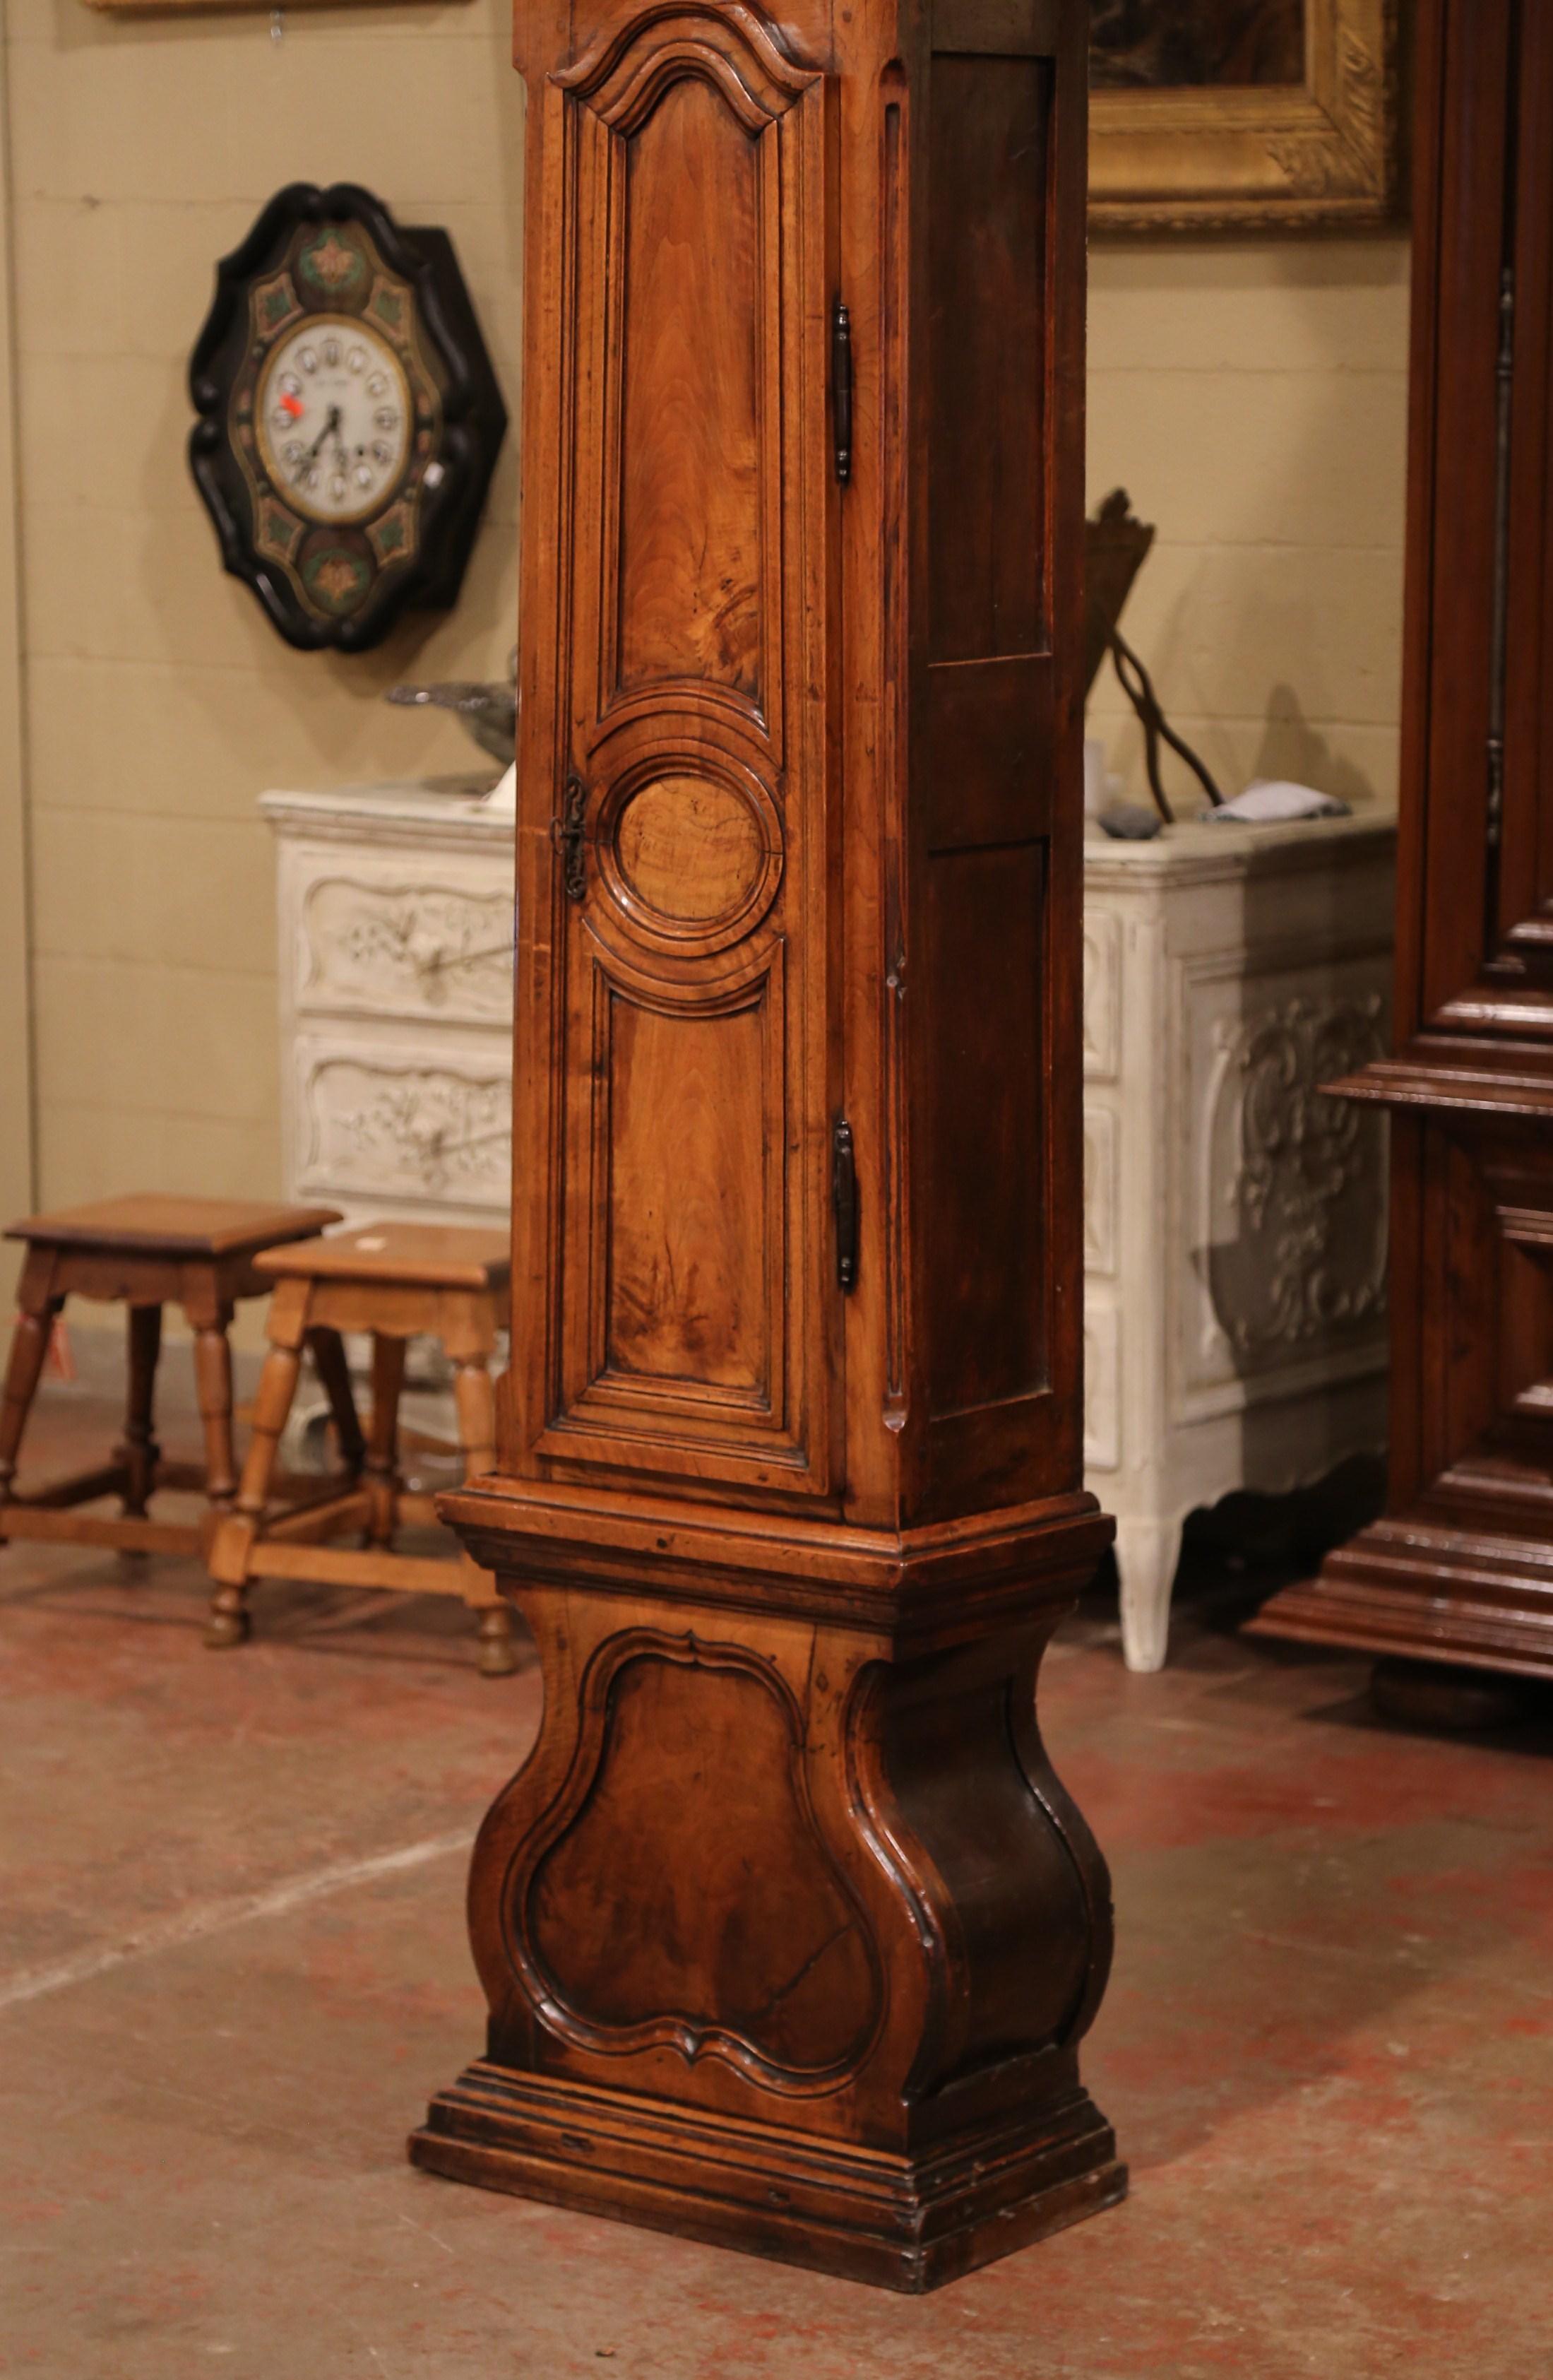 Hand-Carved 18th Century French Louis XIV Carved Walnut Tall Case Clock from Lyon